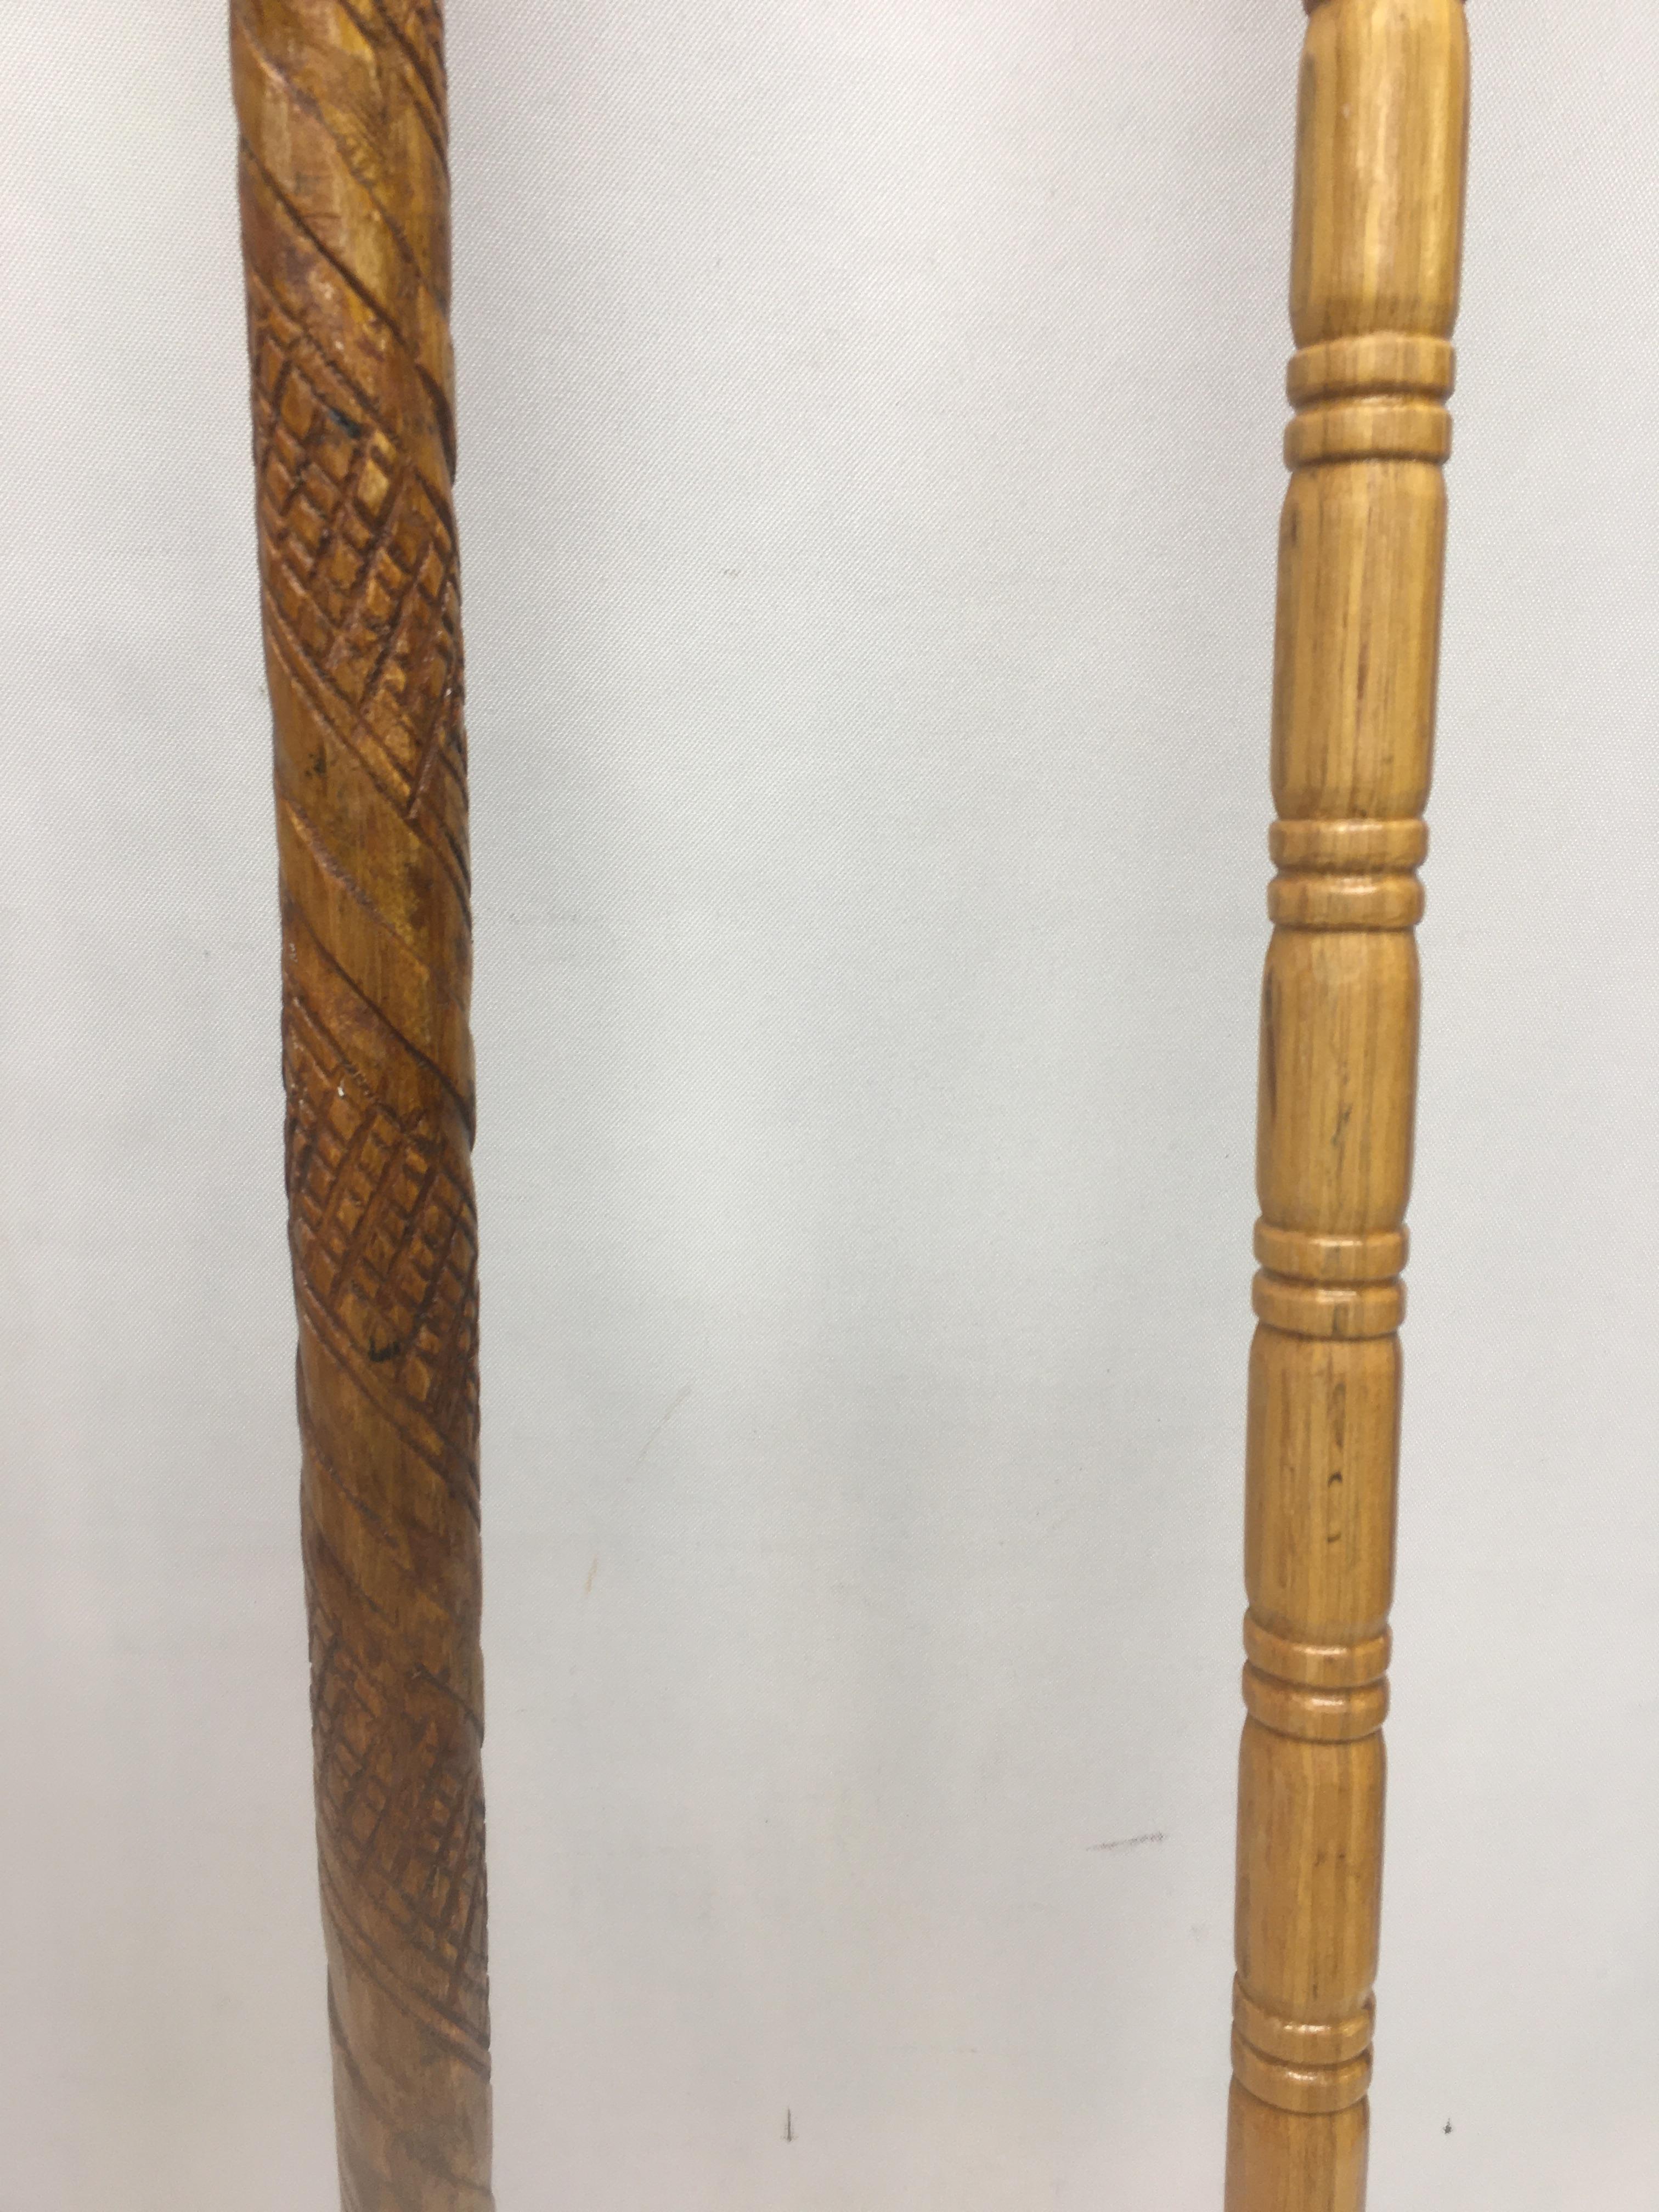 (2) Old Walking Canes